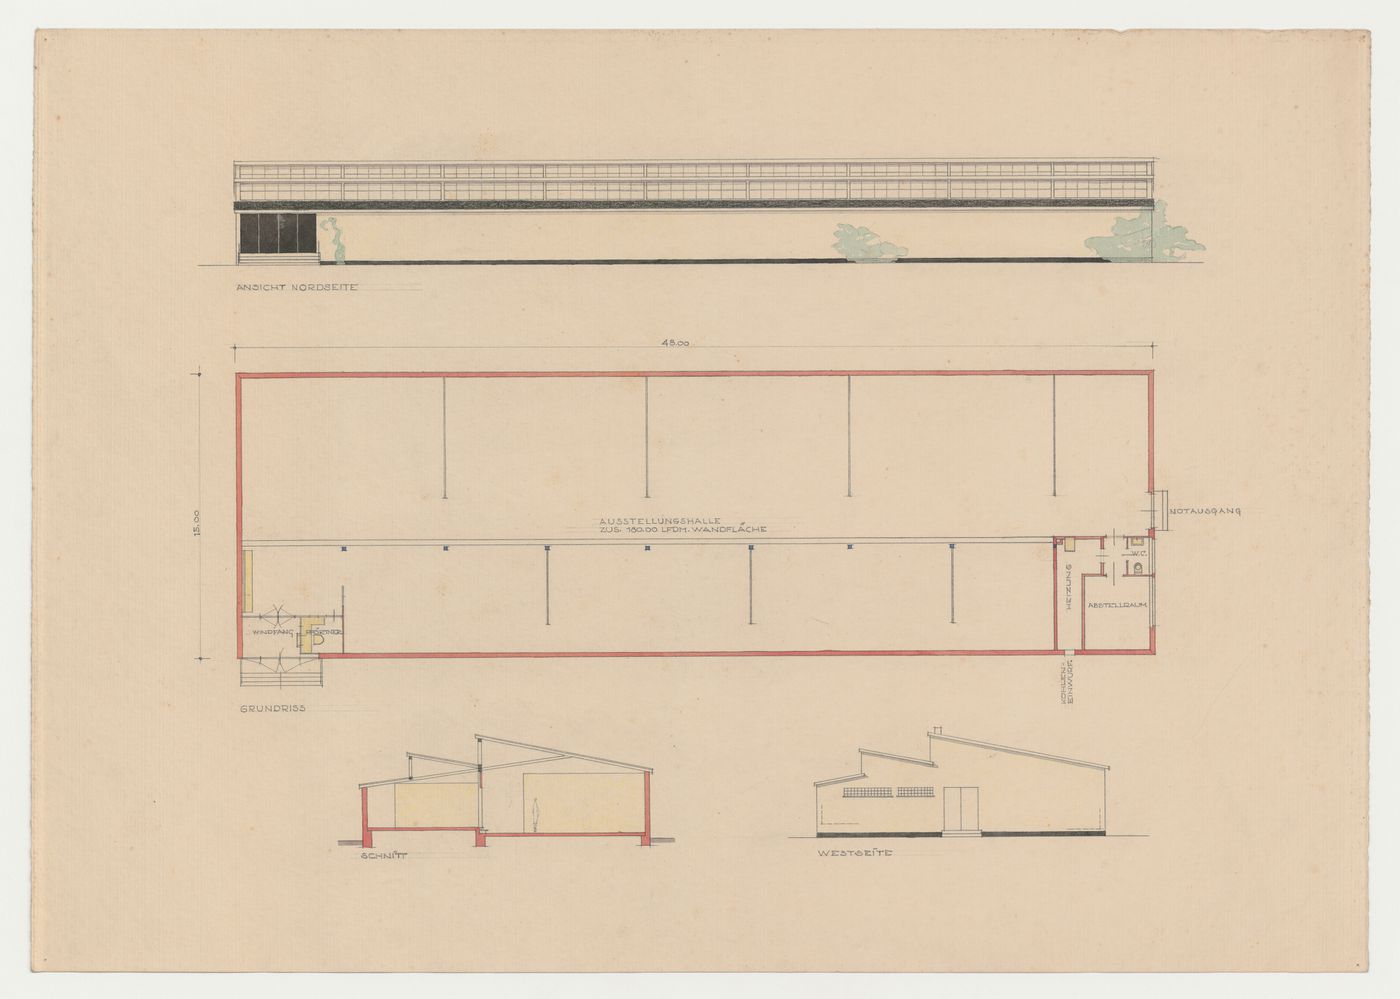 North and west elevations, ground floor plan, and section for an exhibition hall, Frankfurt am Main, Germany